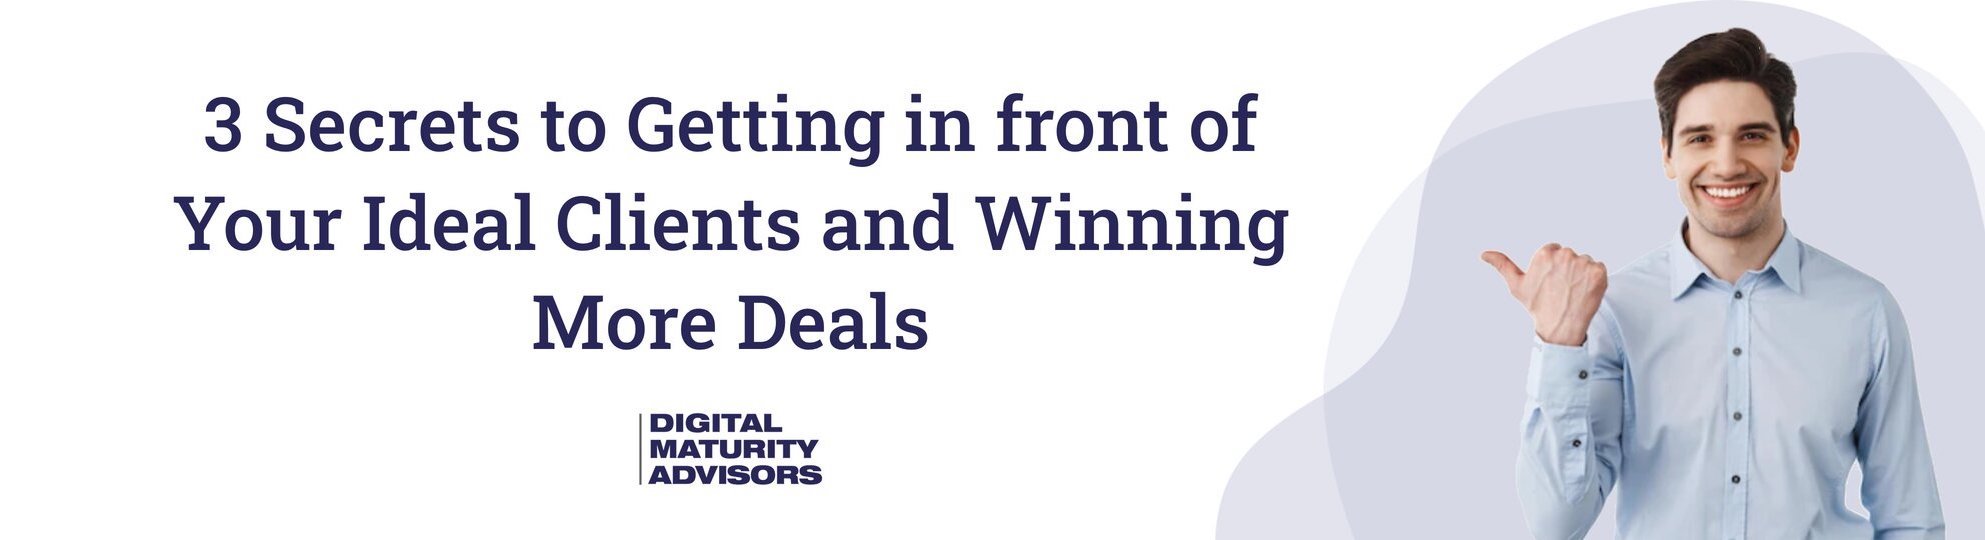 3 Secrets to Getting in front of Your Ideal Clients and Winning More Deals header